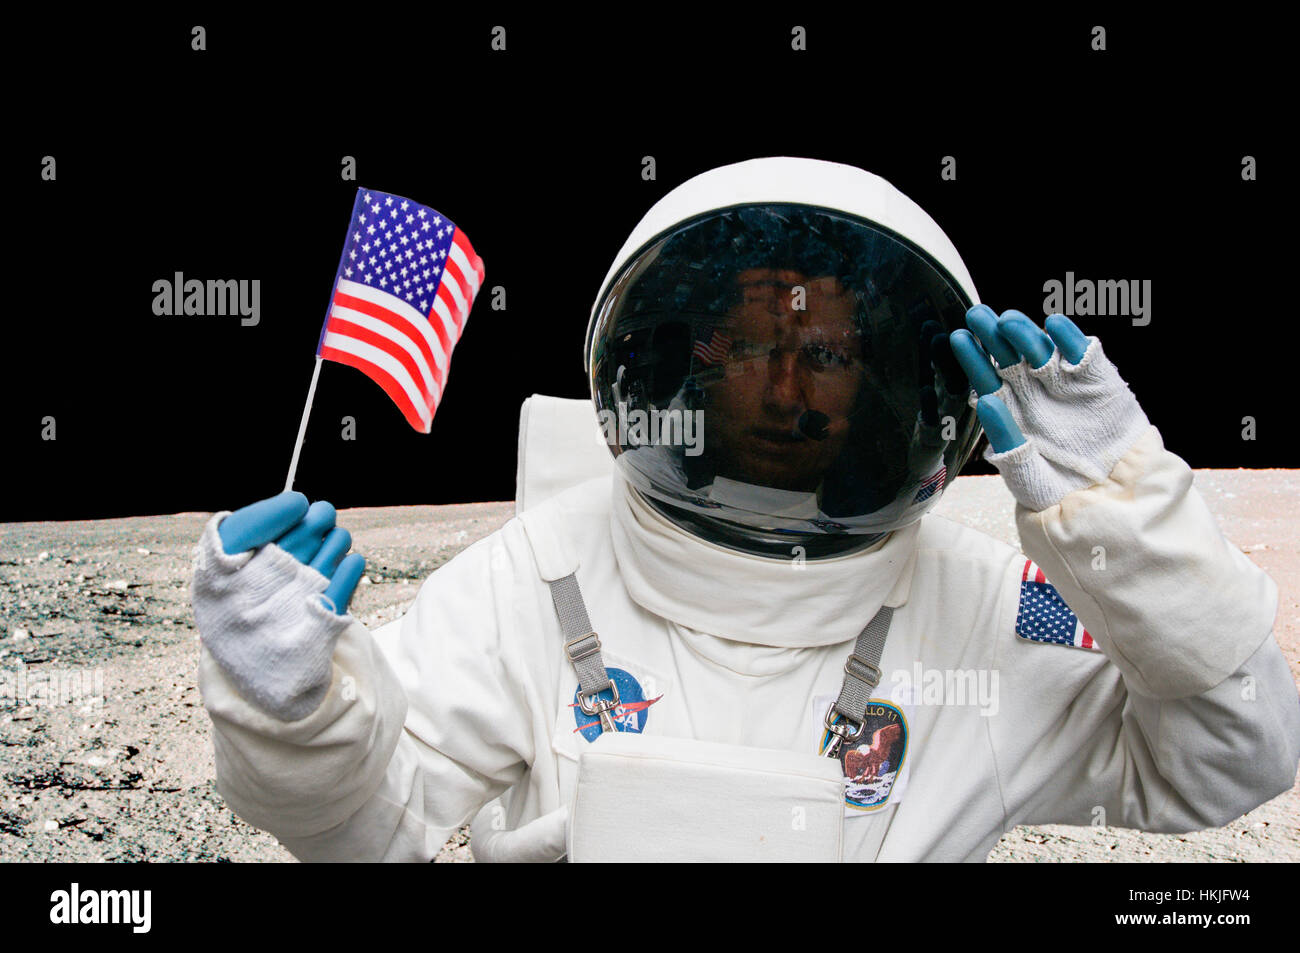 Person dressed as a NASA astronaut holding an American flag on a street. Stock Photo